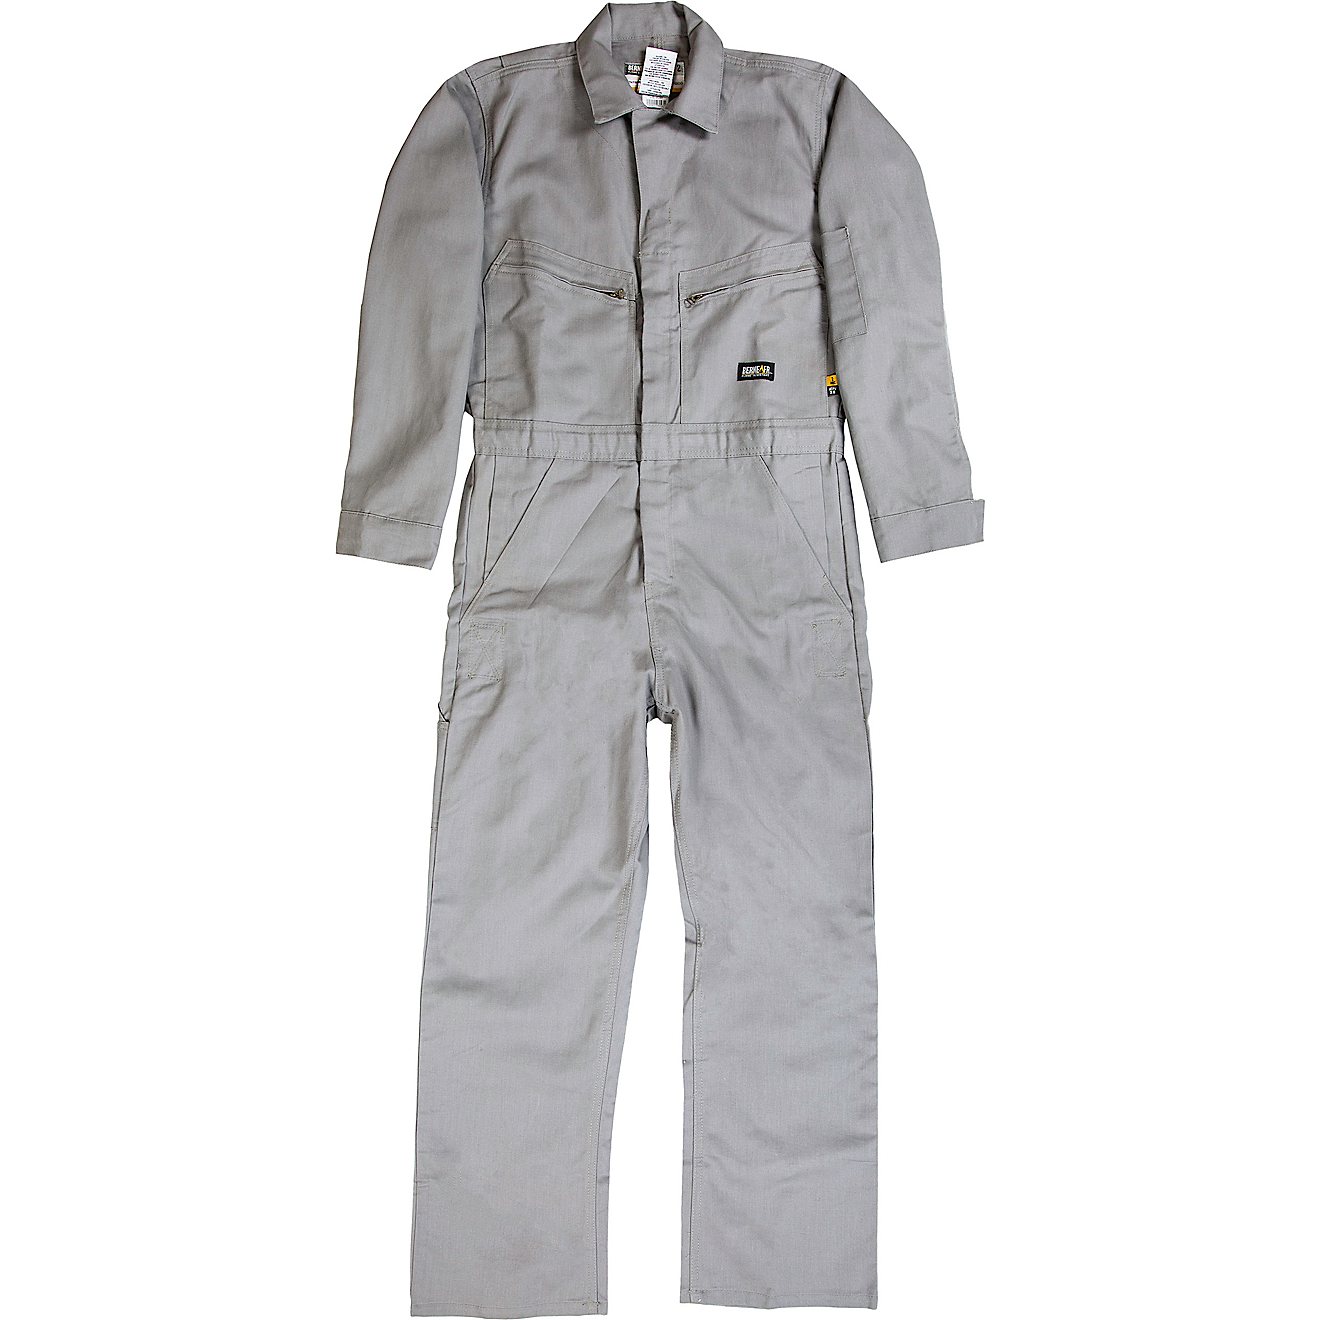 Berne Men's FR Unlined Deluxe Coveralls                                                                                          - view number 2